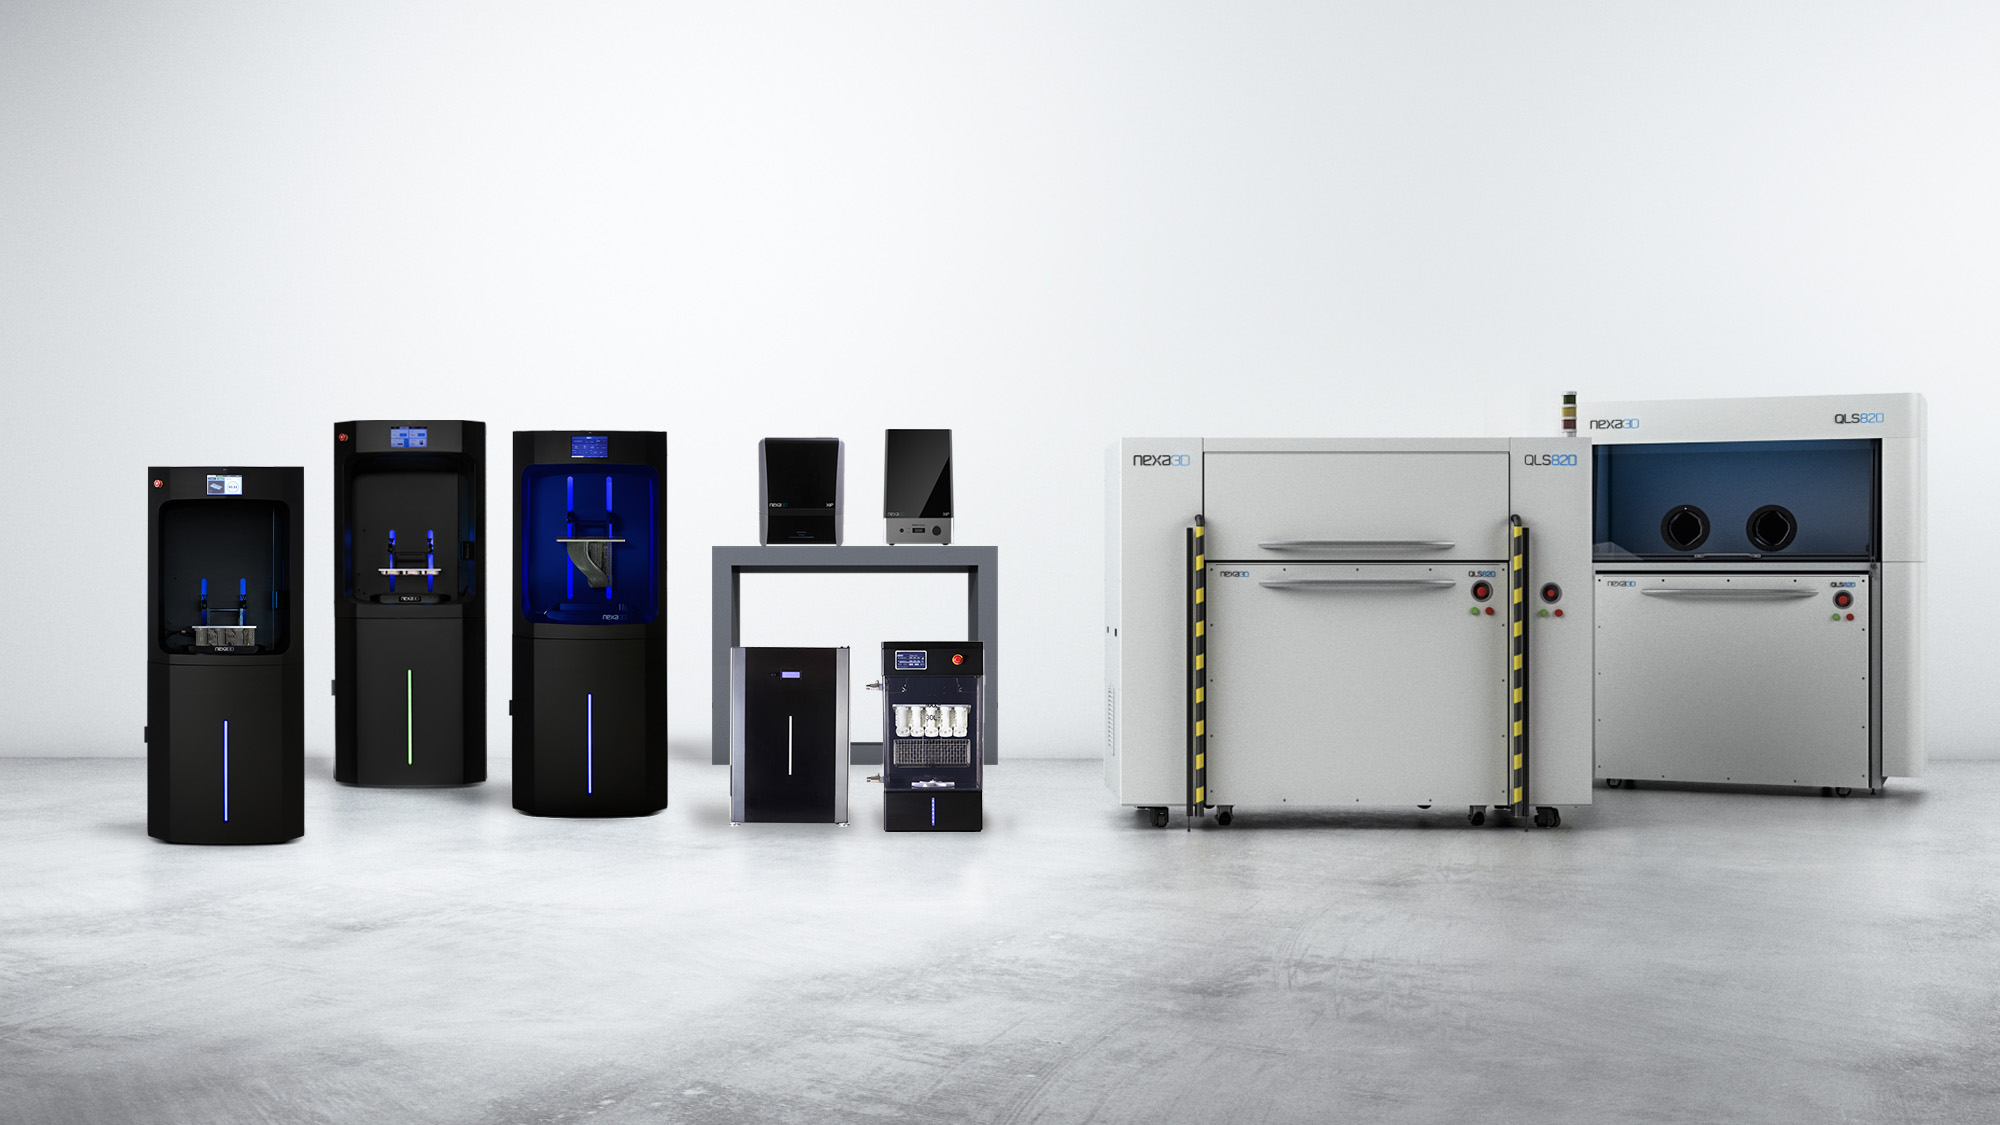 More Industrial 3D Printers from Nexa3D